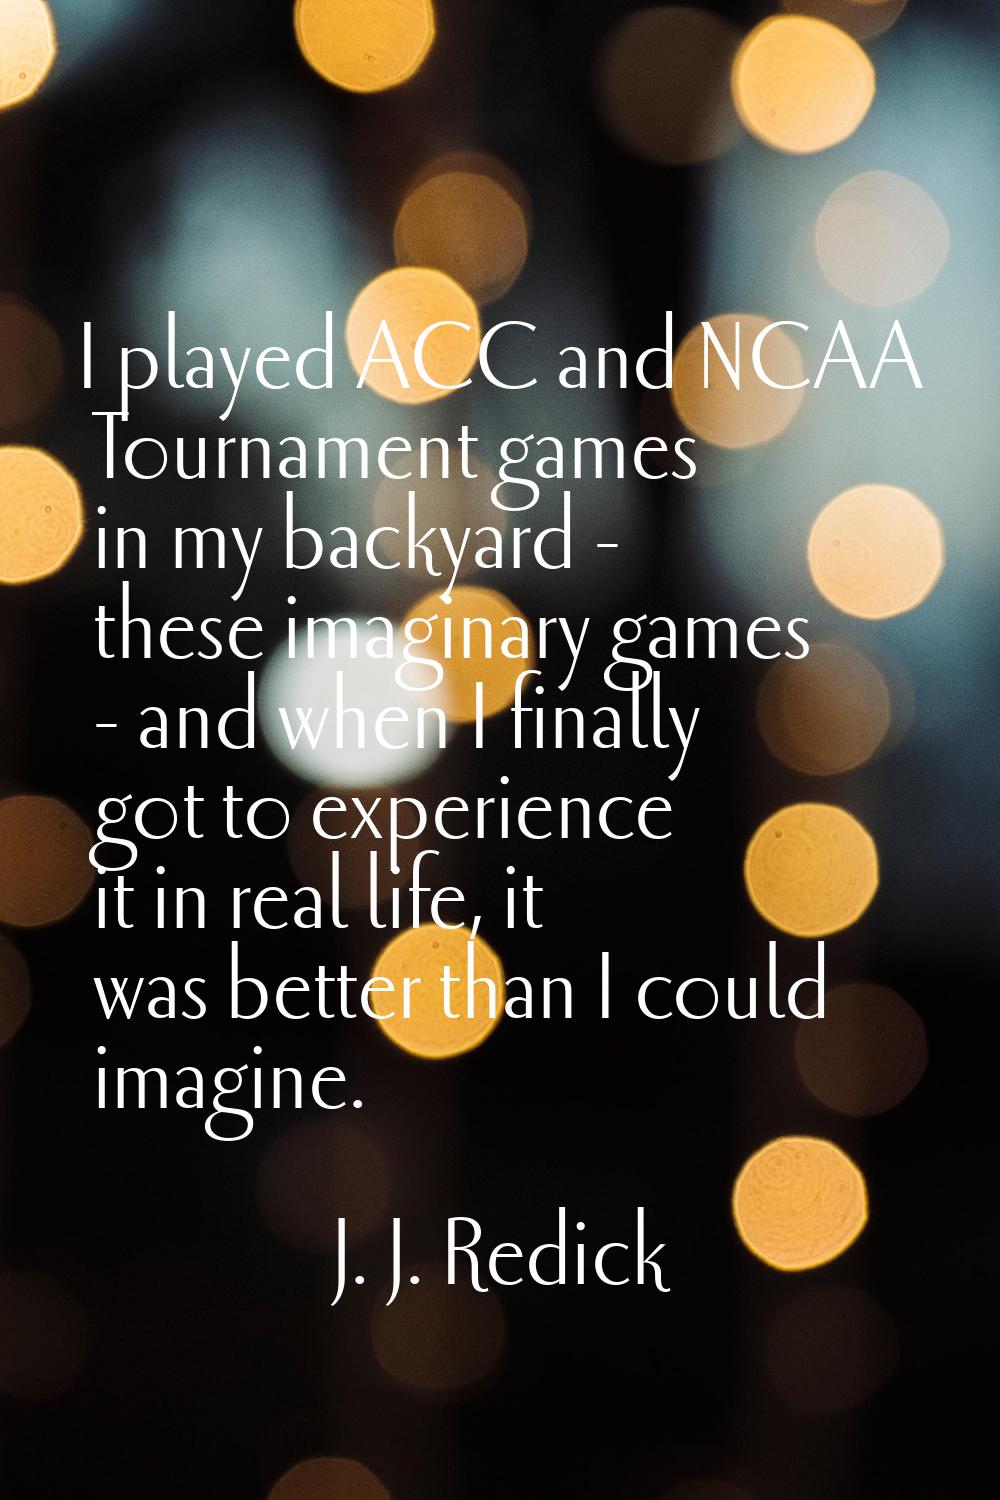 I played ACC and NCAA Tournament games in my backyard - these imaginary games - and when I finally 